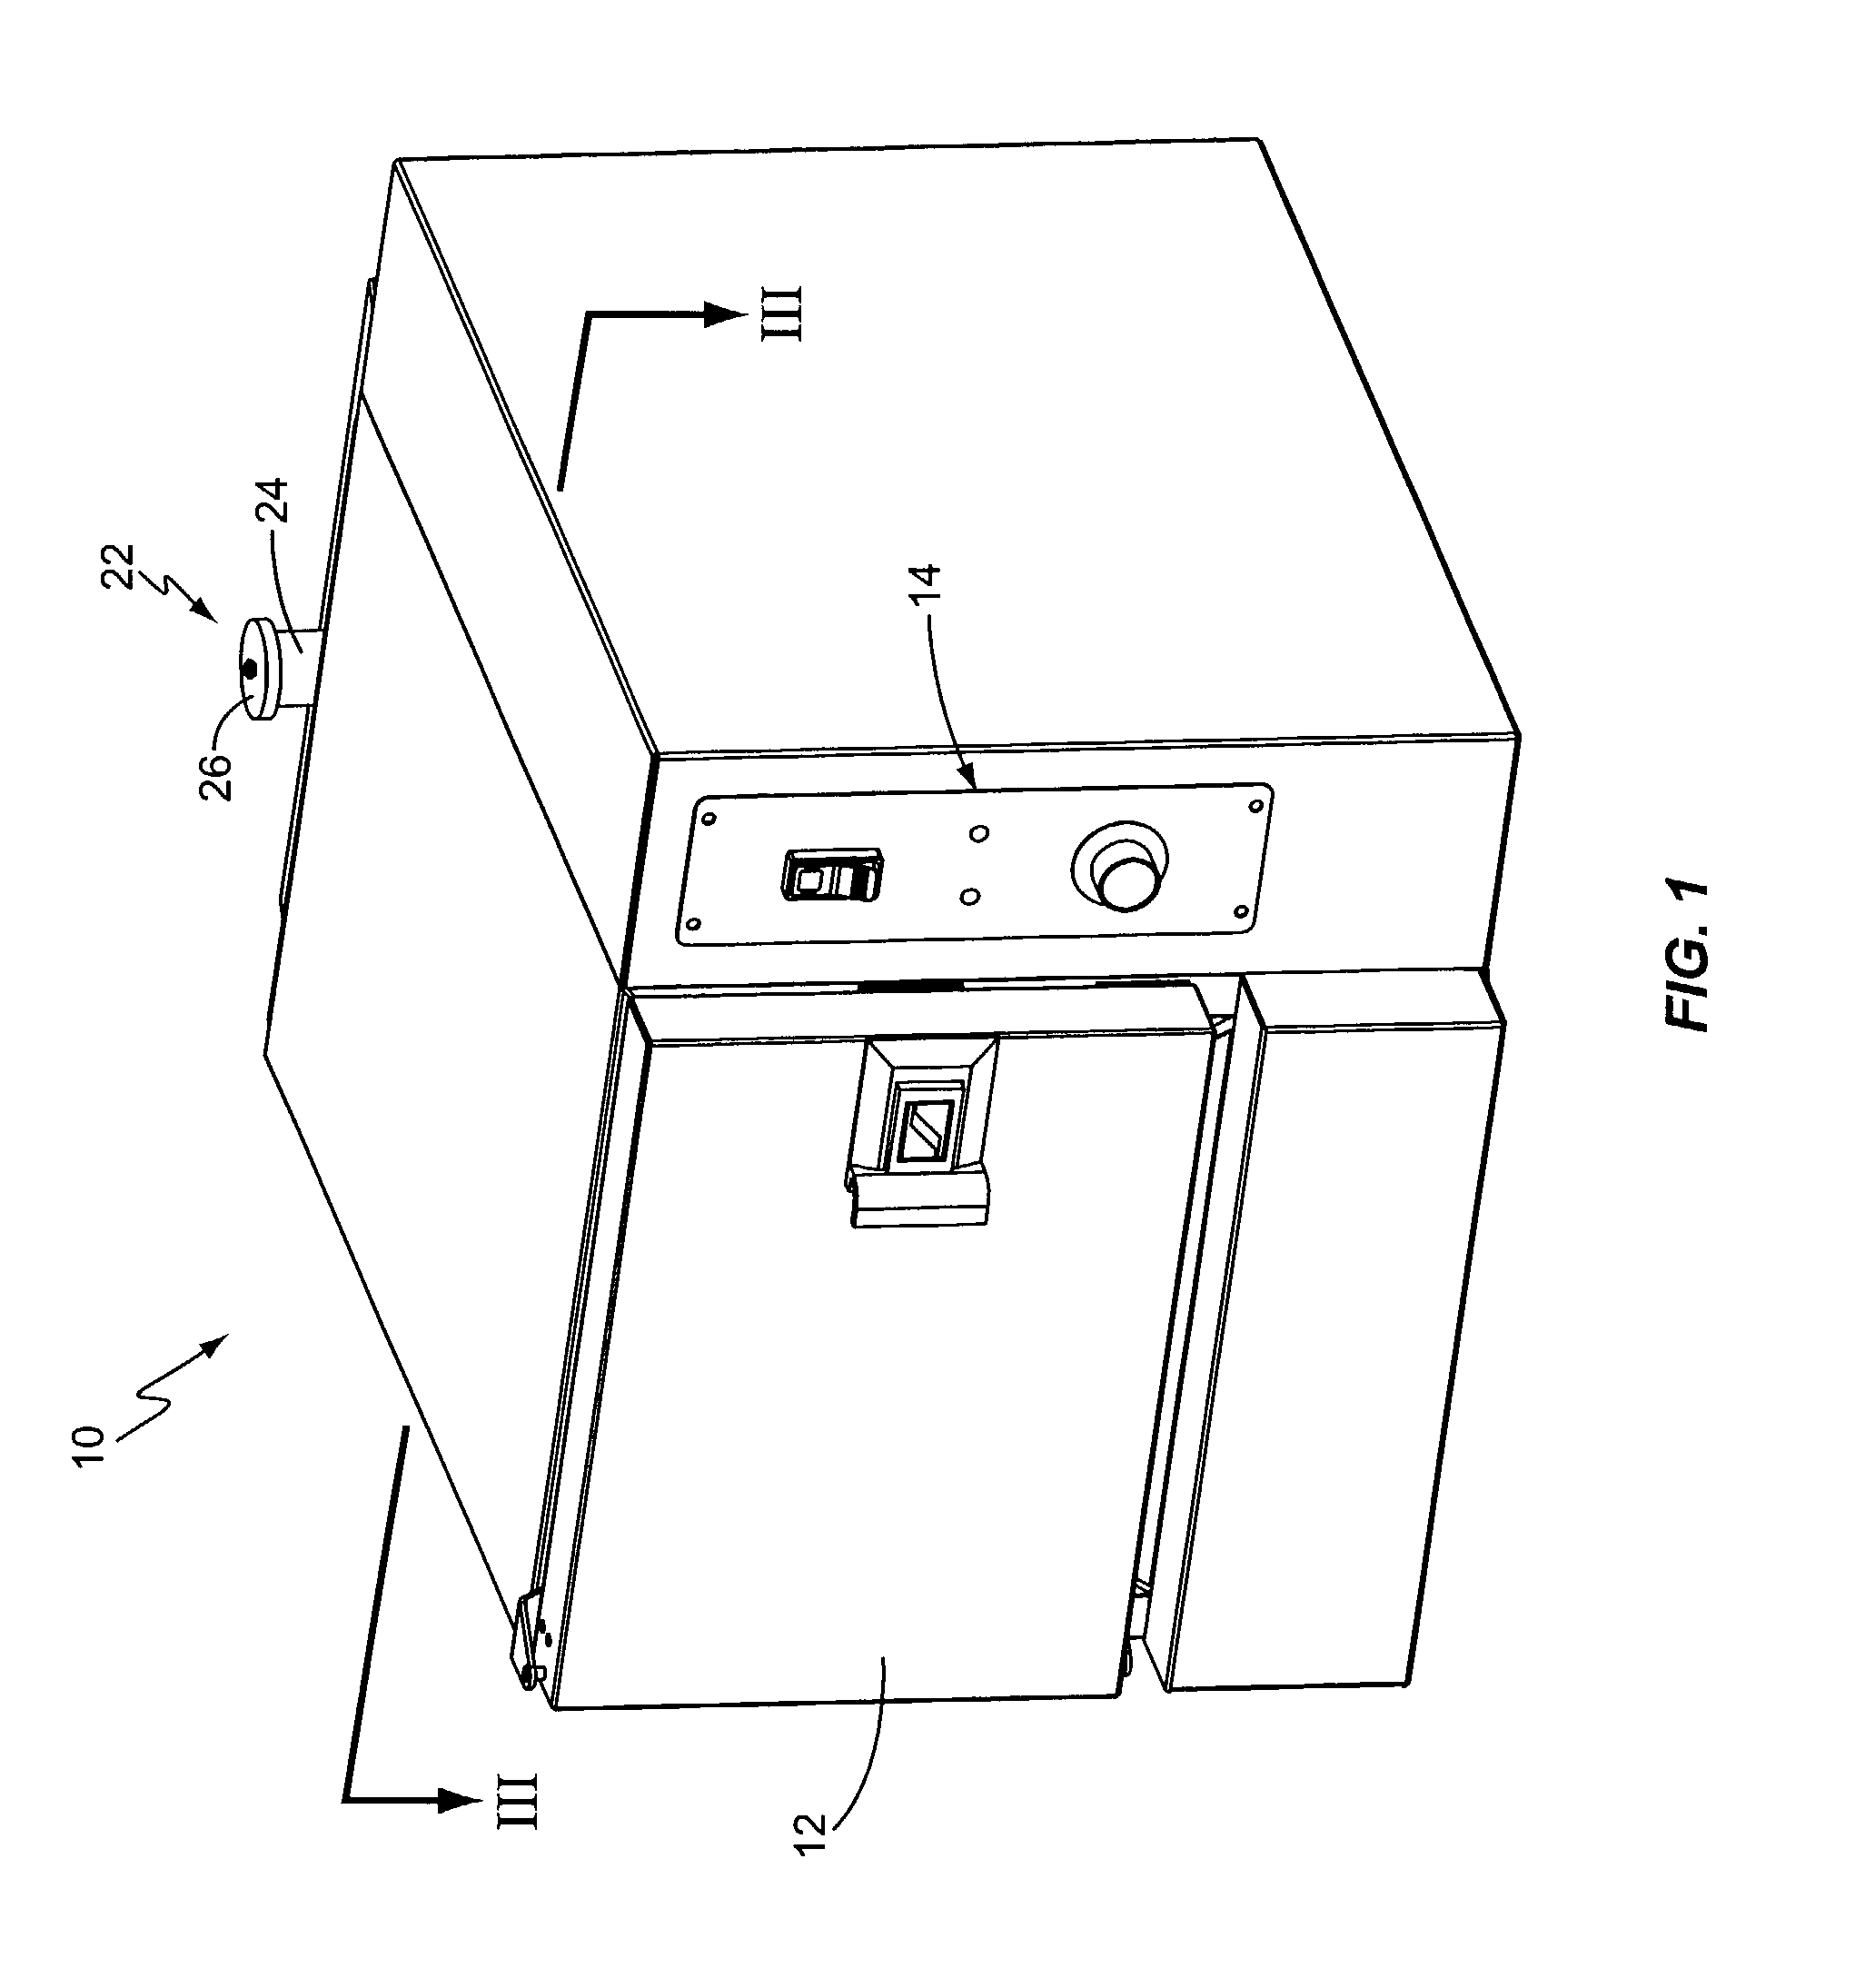 Convection steamer with forced recirculation through steam bath